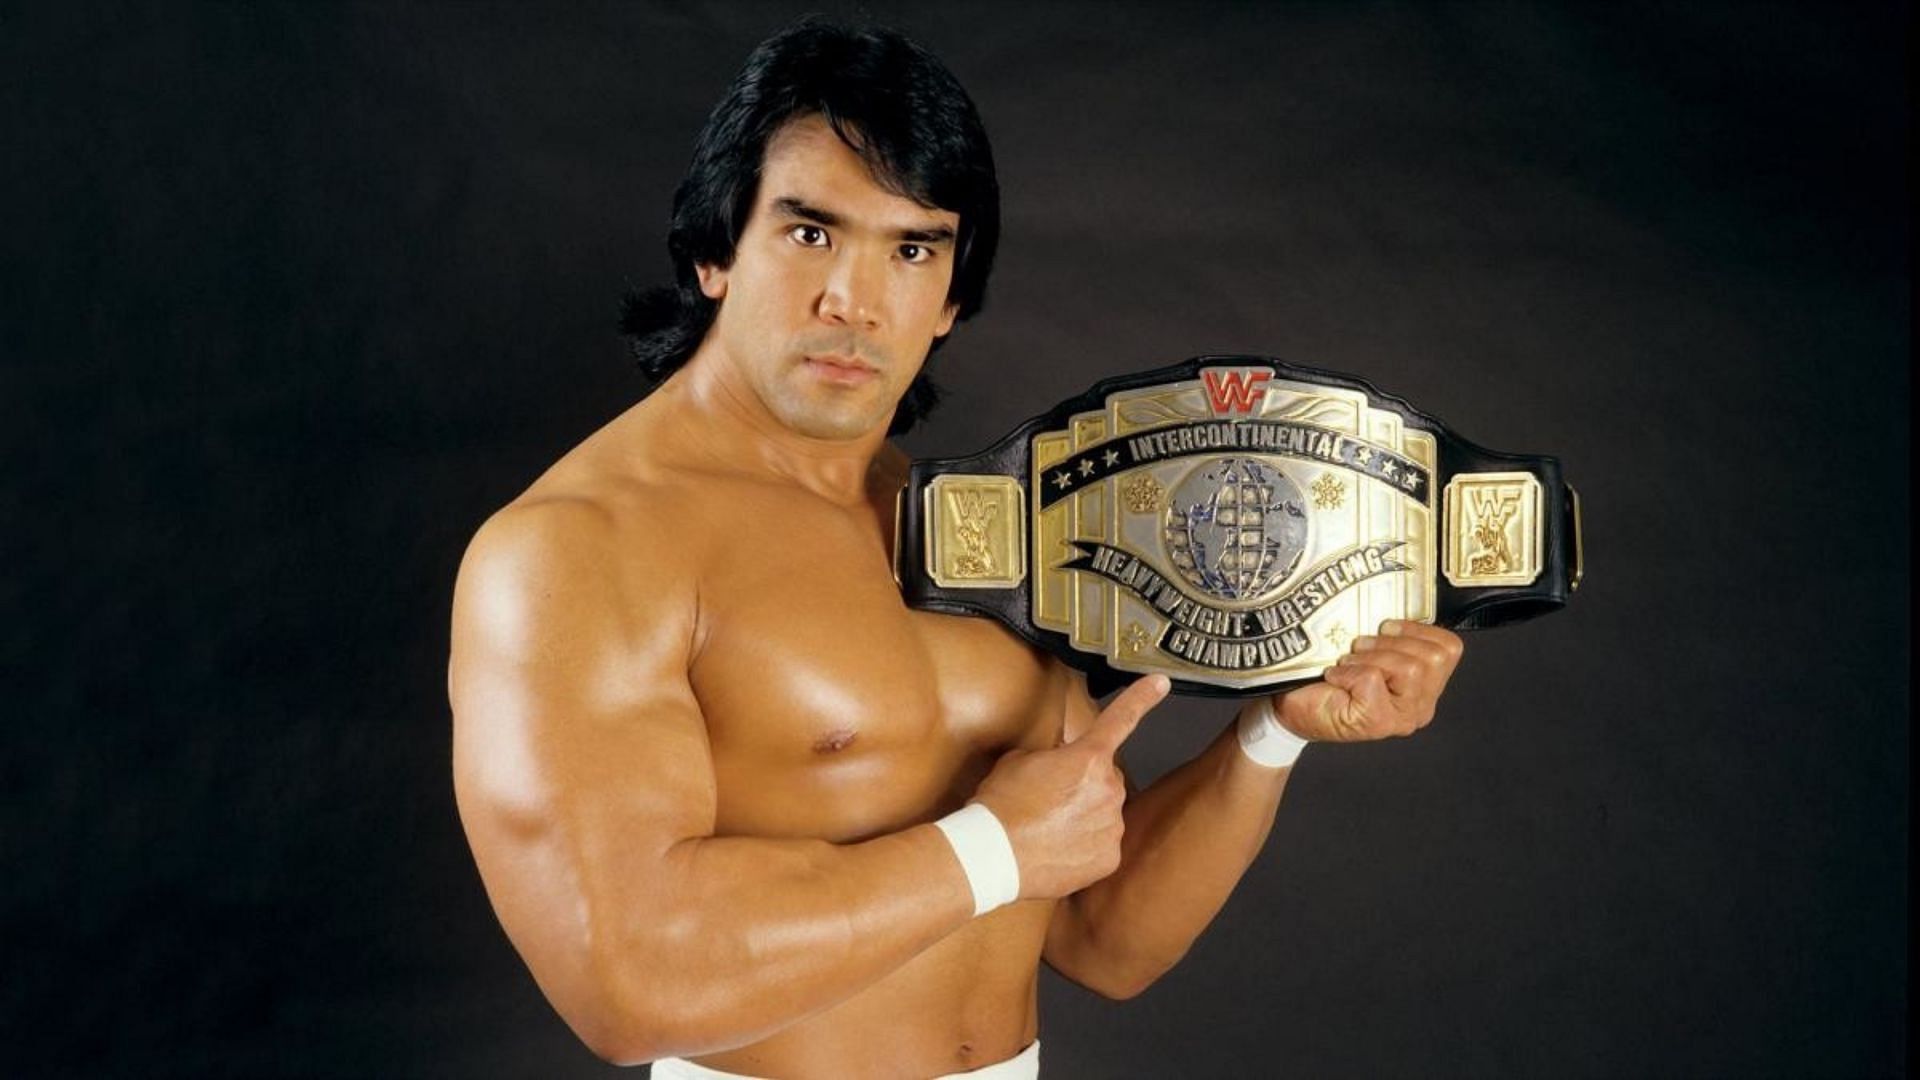 Ricky Steamboat with the WWE Intercontinental Championship